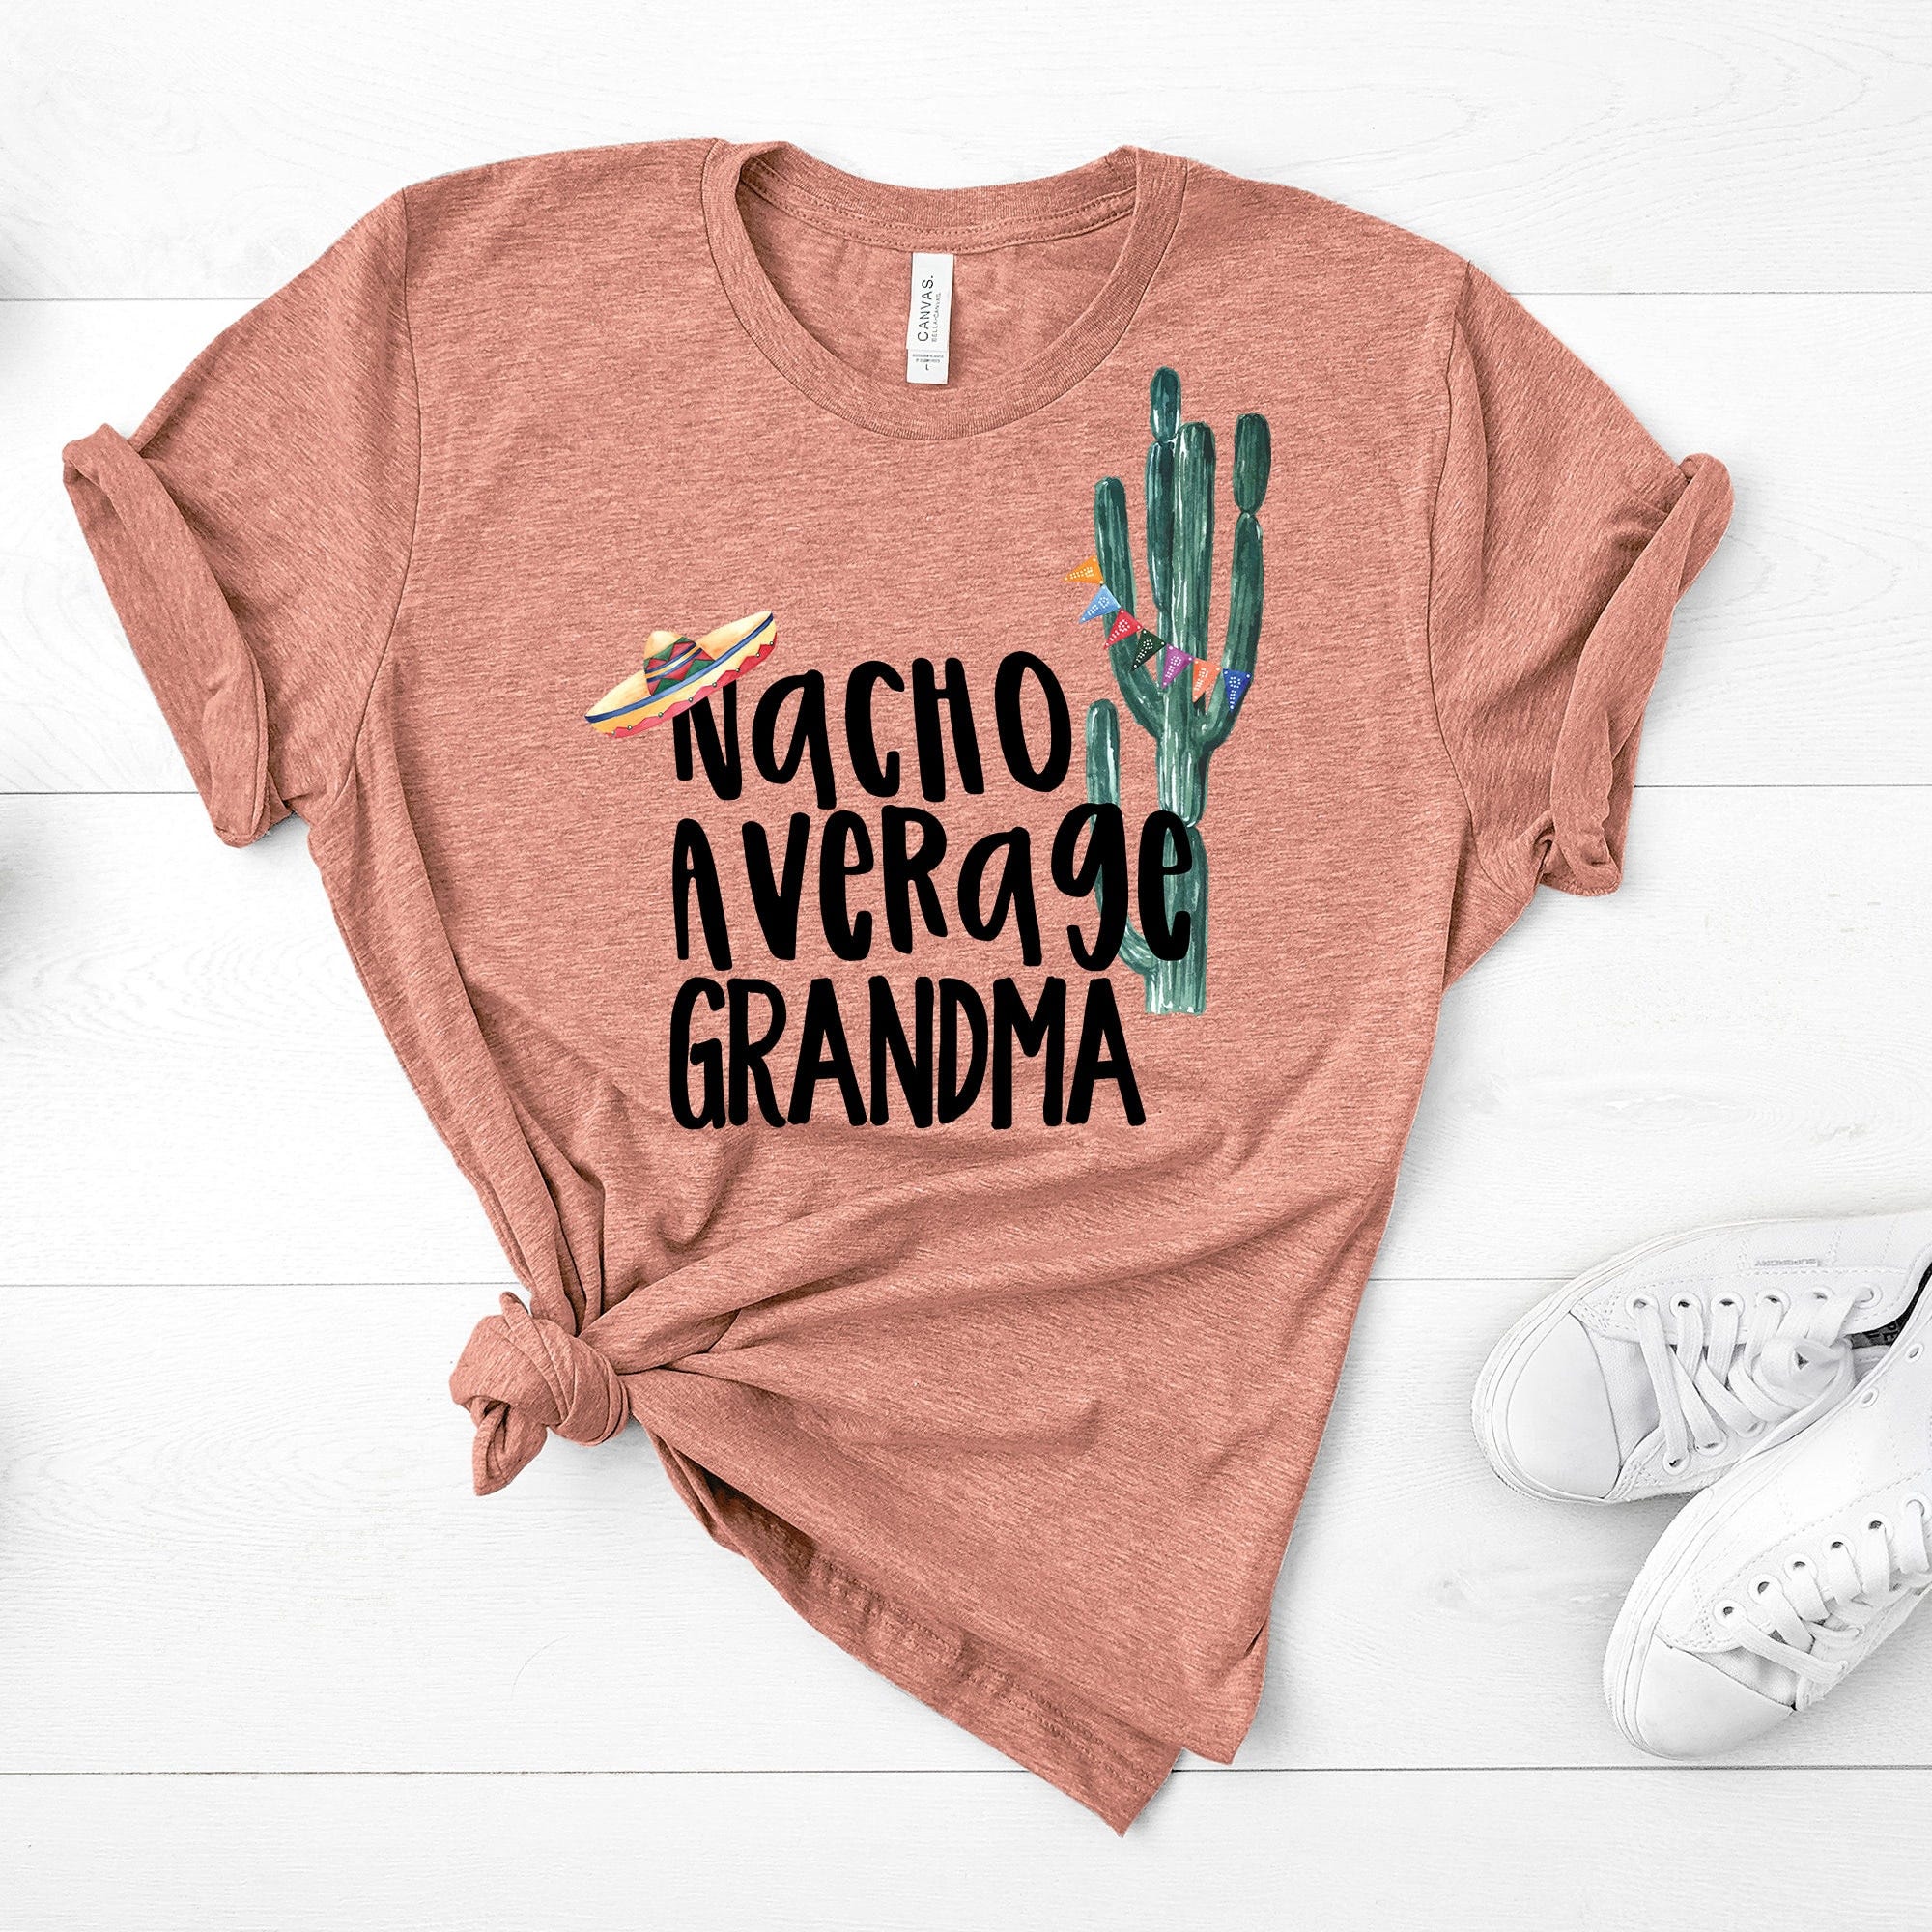 Nacho Average Grandma, Soft Premium Unisex Tee, Pick From Athletic Gray Or Icy Blue Or Heather Sunset Shirt Color, Super Soft Tee Shirt